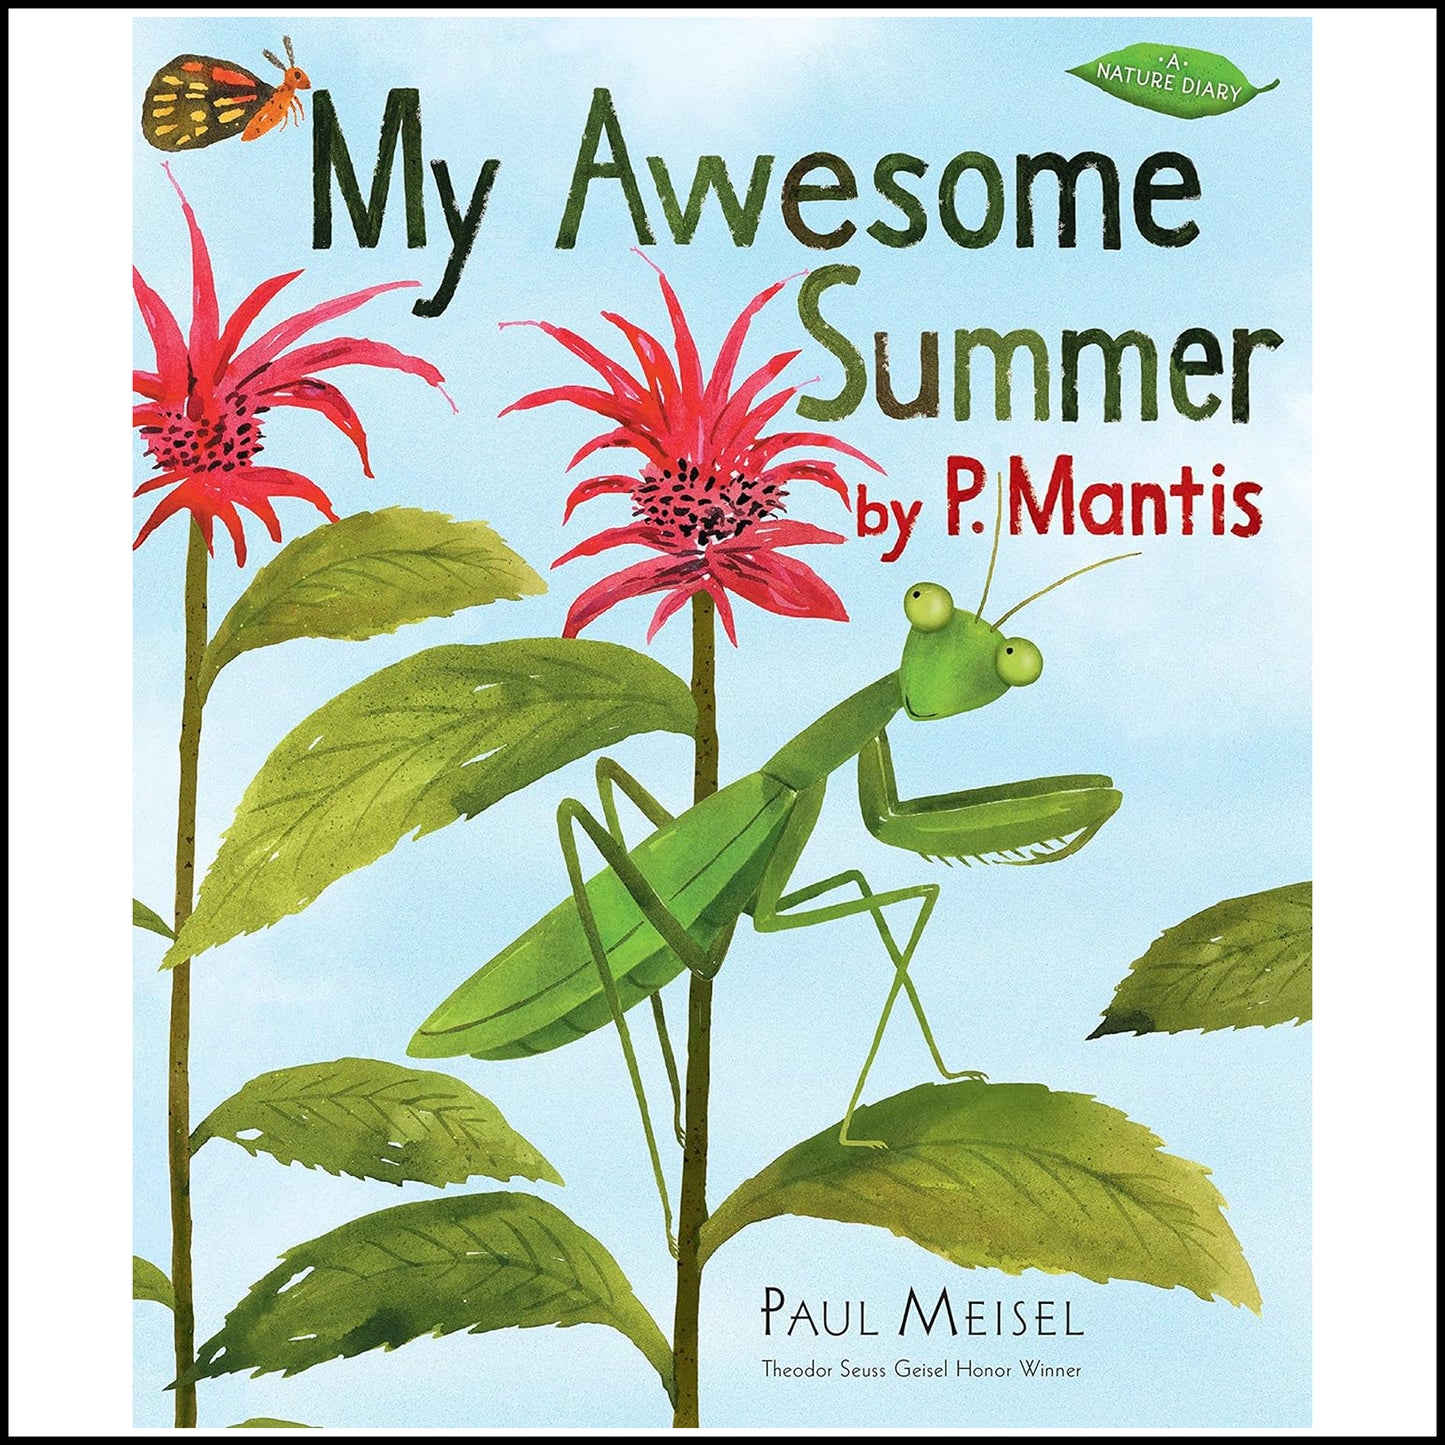 Book - My Awesome Summer by P. Mantis